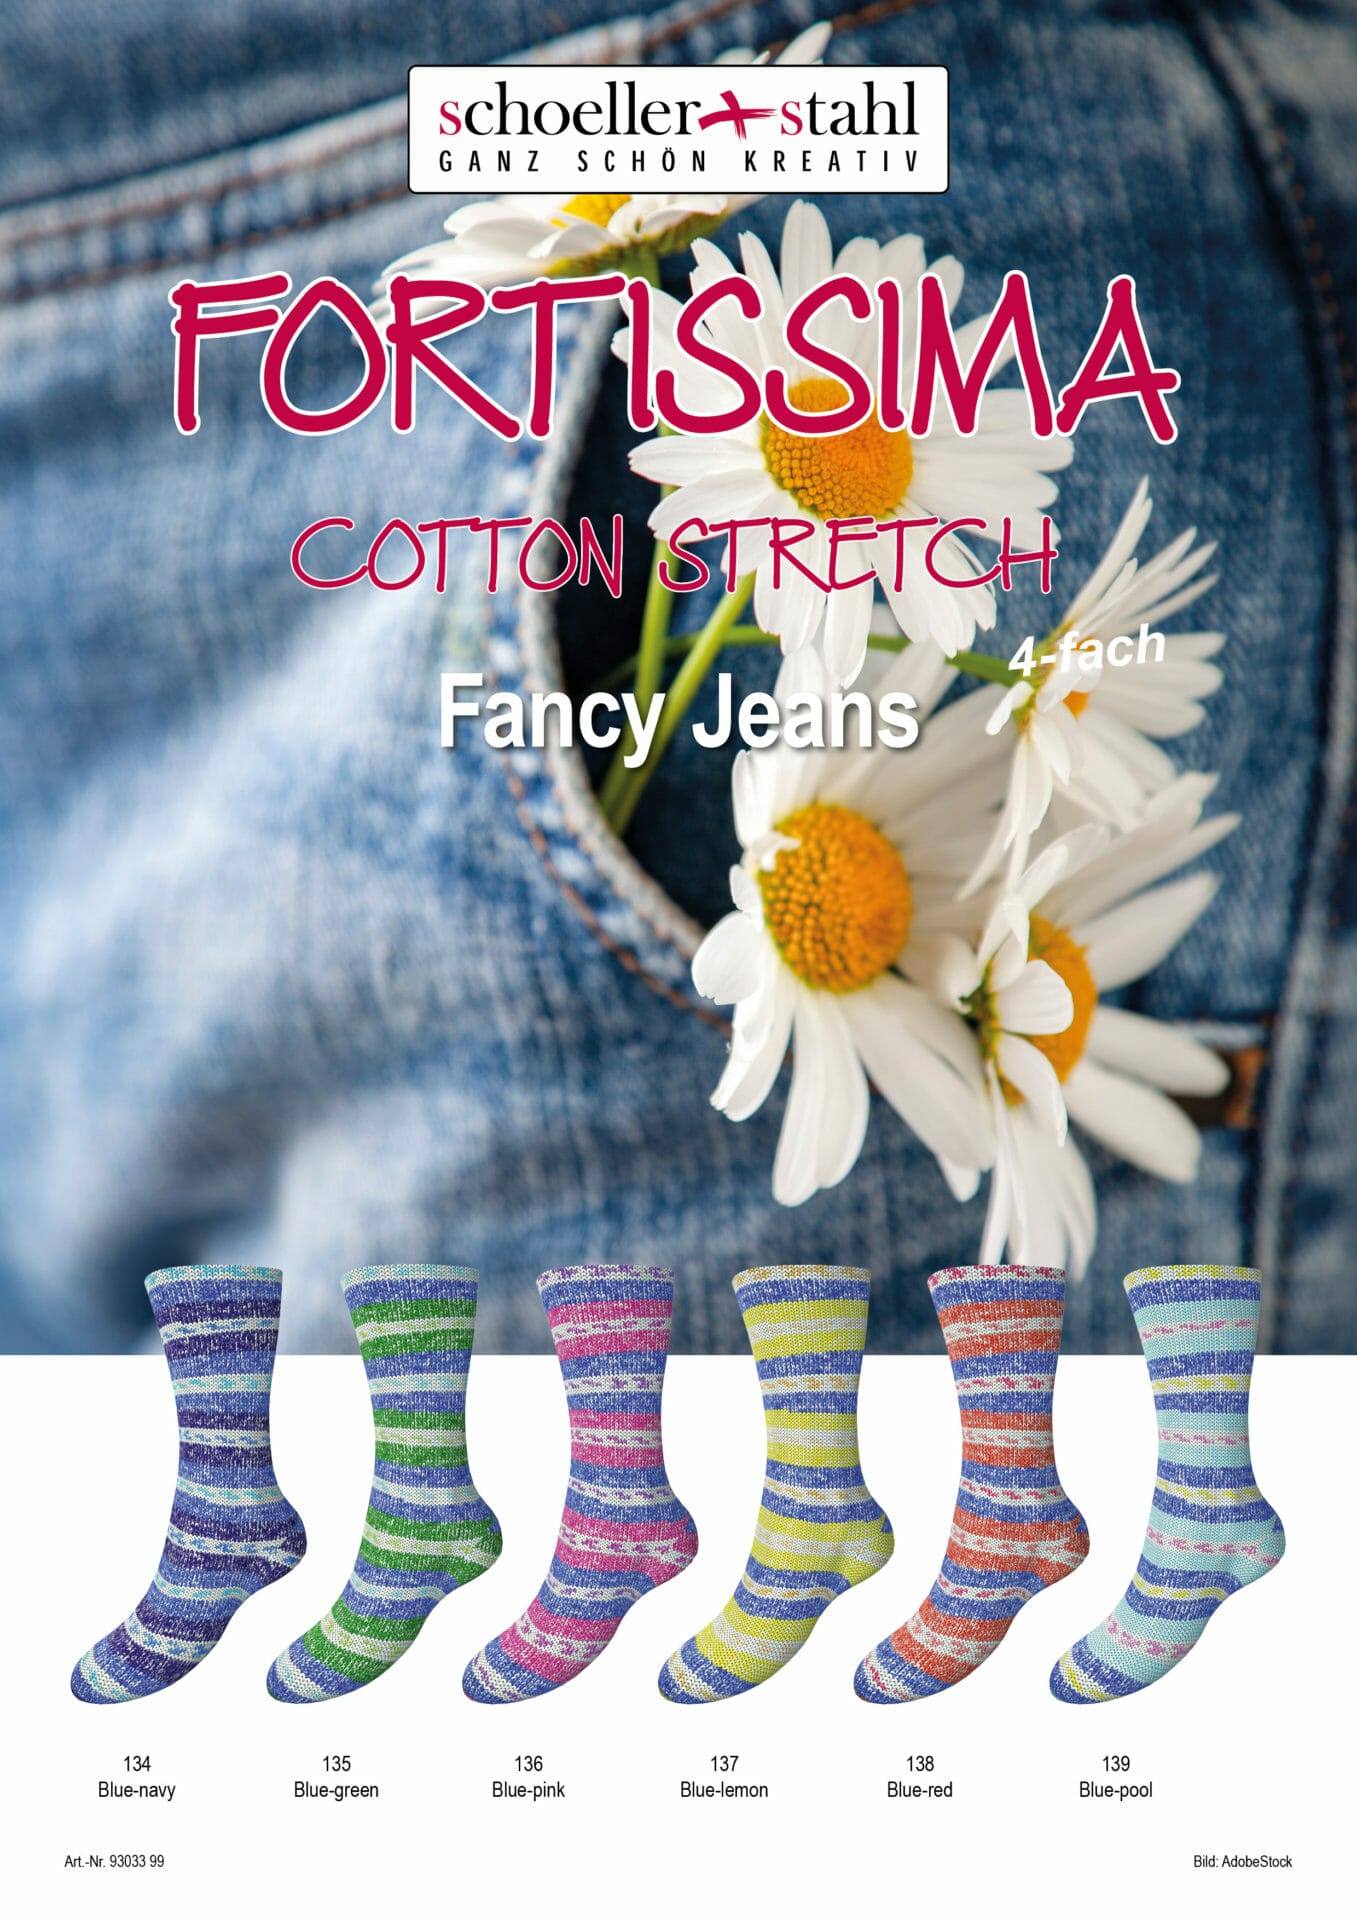 Fortissima Cotton Stretch “Fancy Jeans” 100g